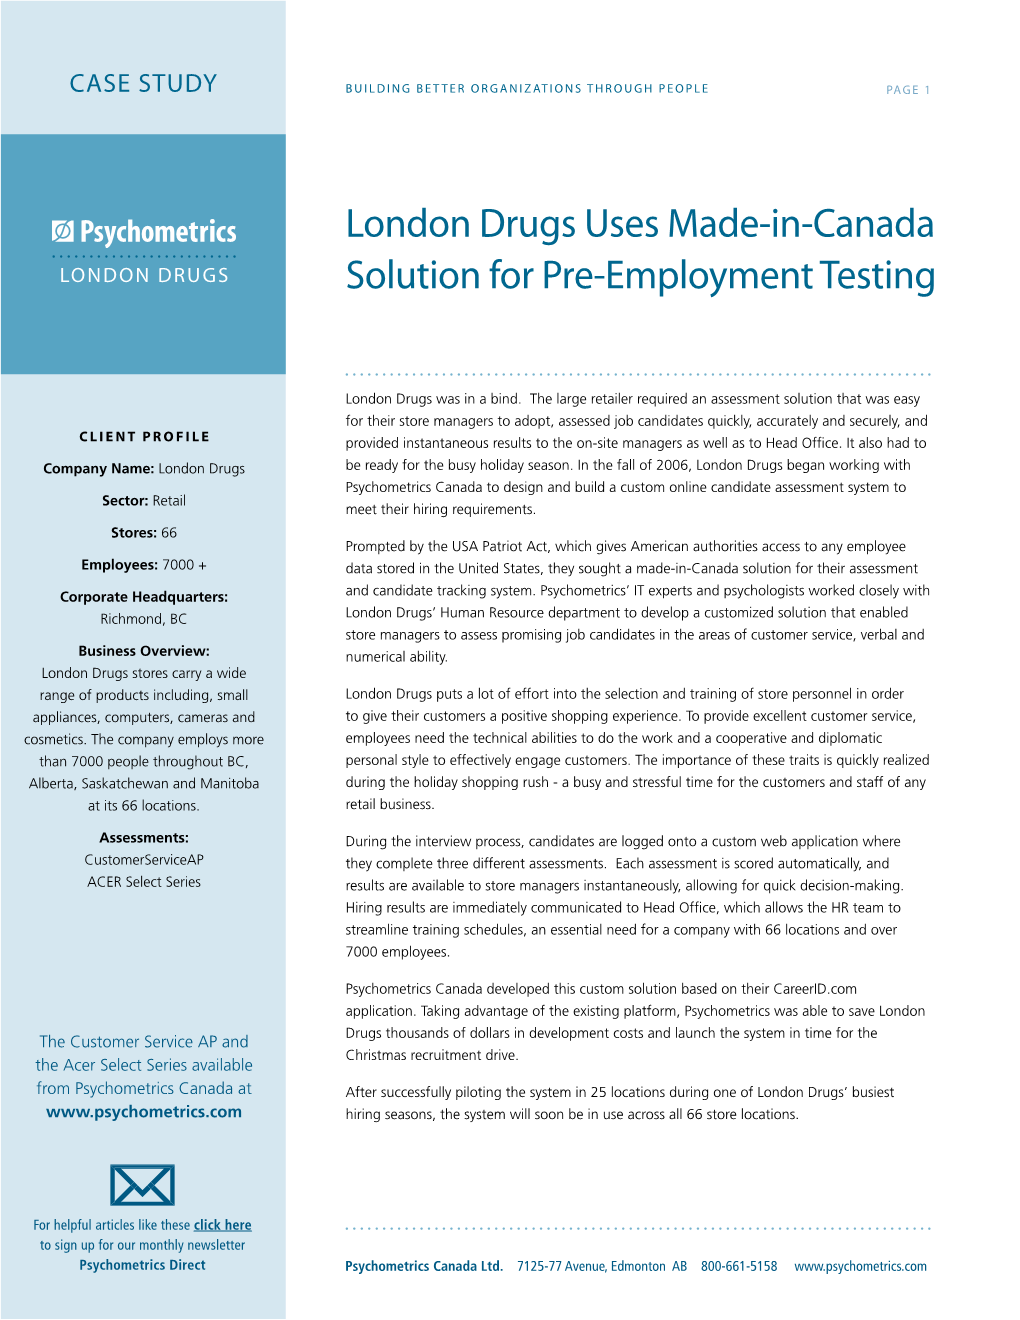 London Drugs Uses Made-In-Canada Solution for Pre-Employment Testing